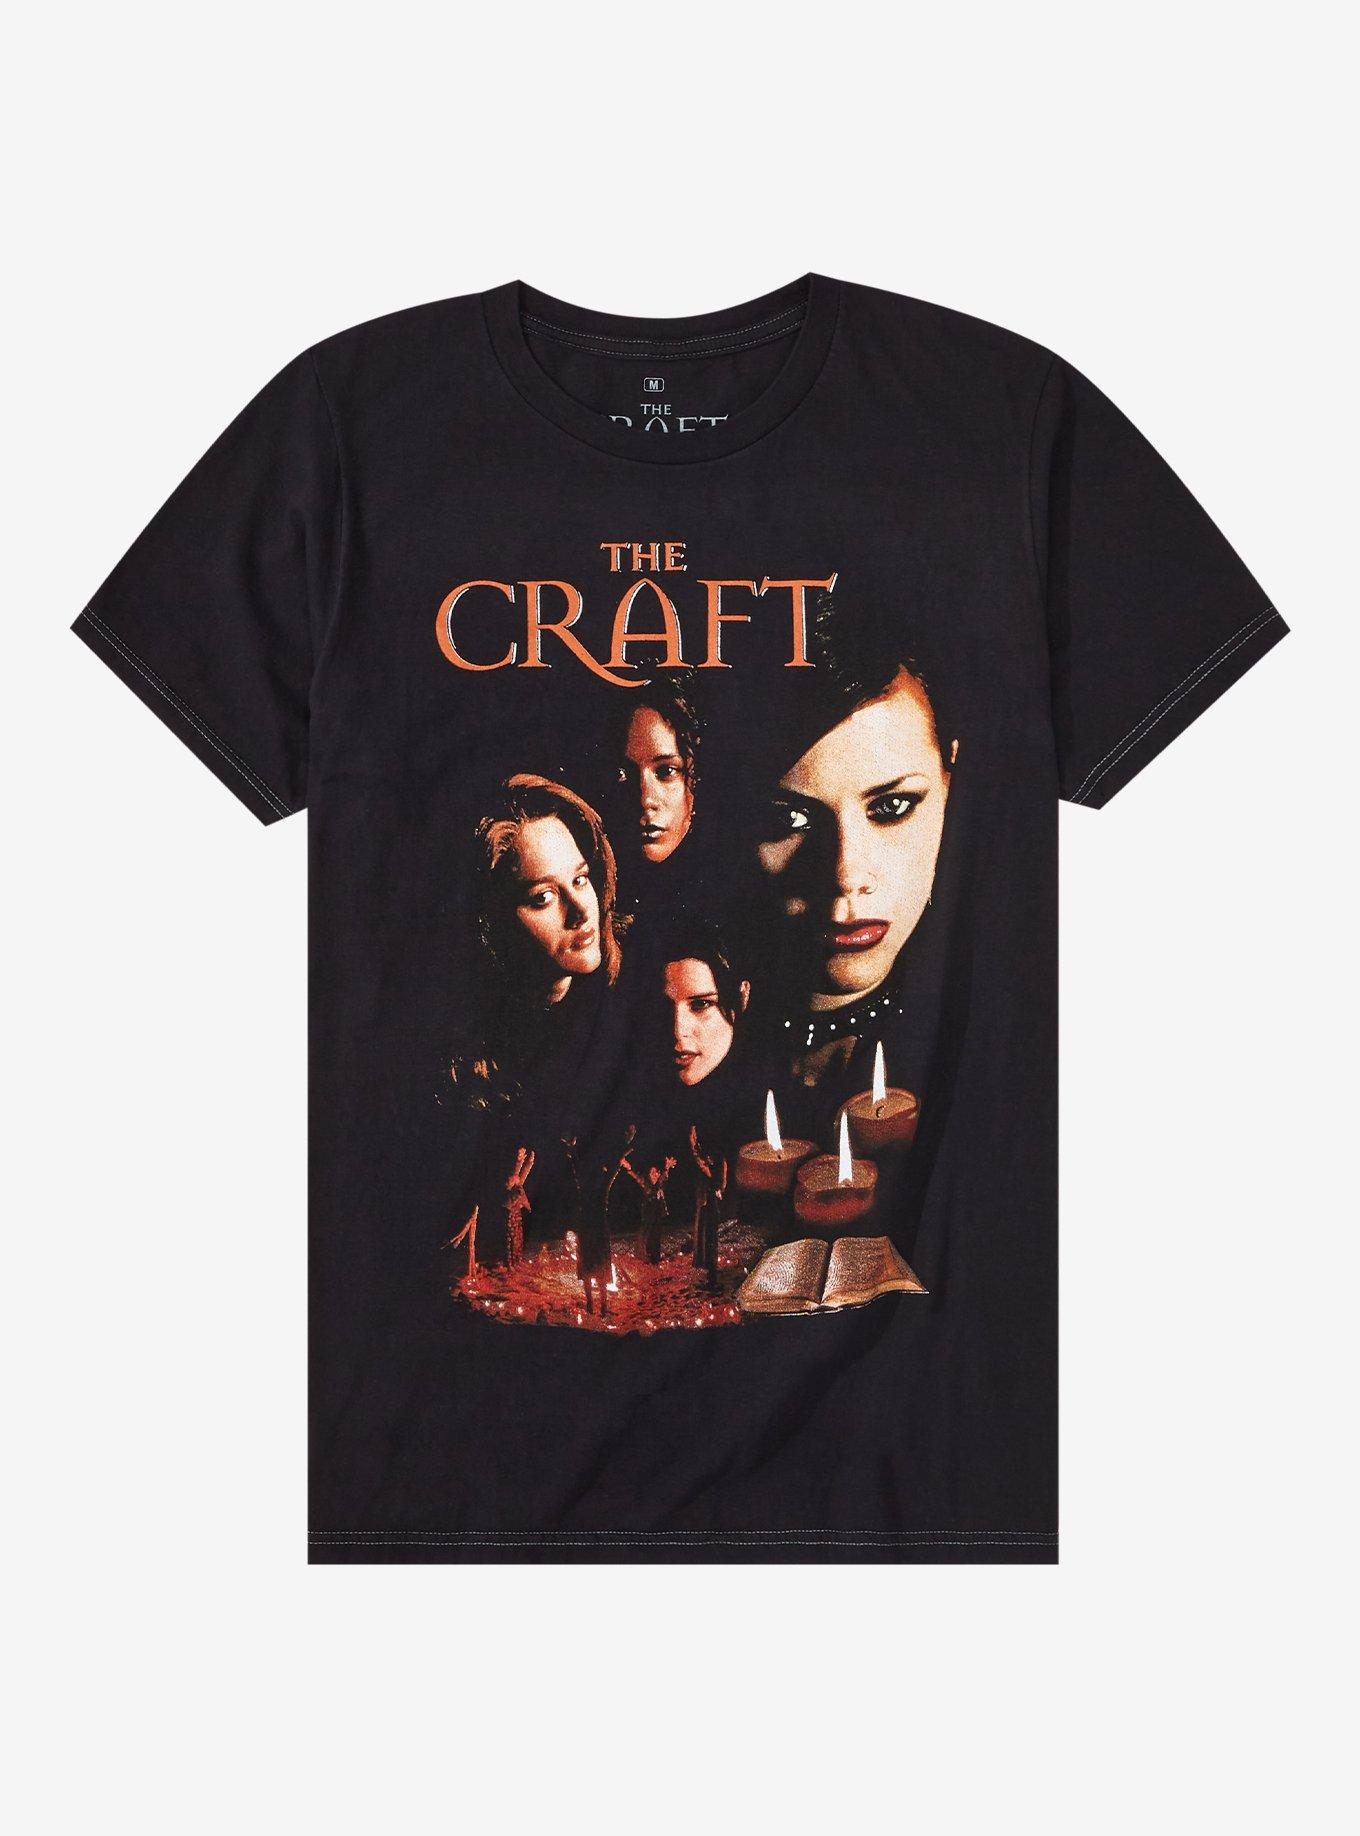 The Craft Characters Collage Boyfriend Fit Girls T-Shirt